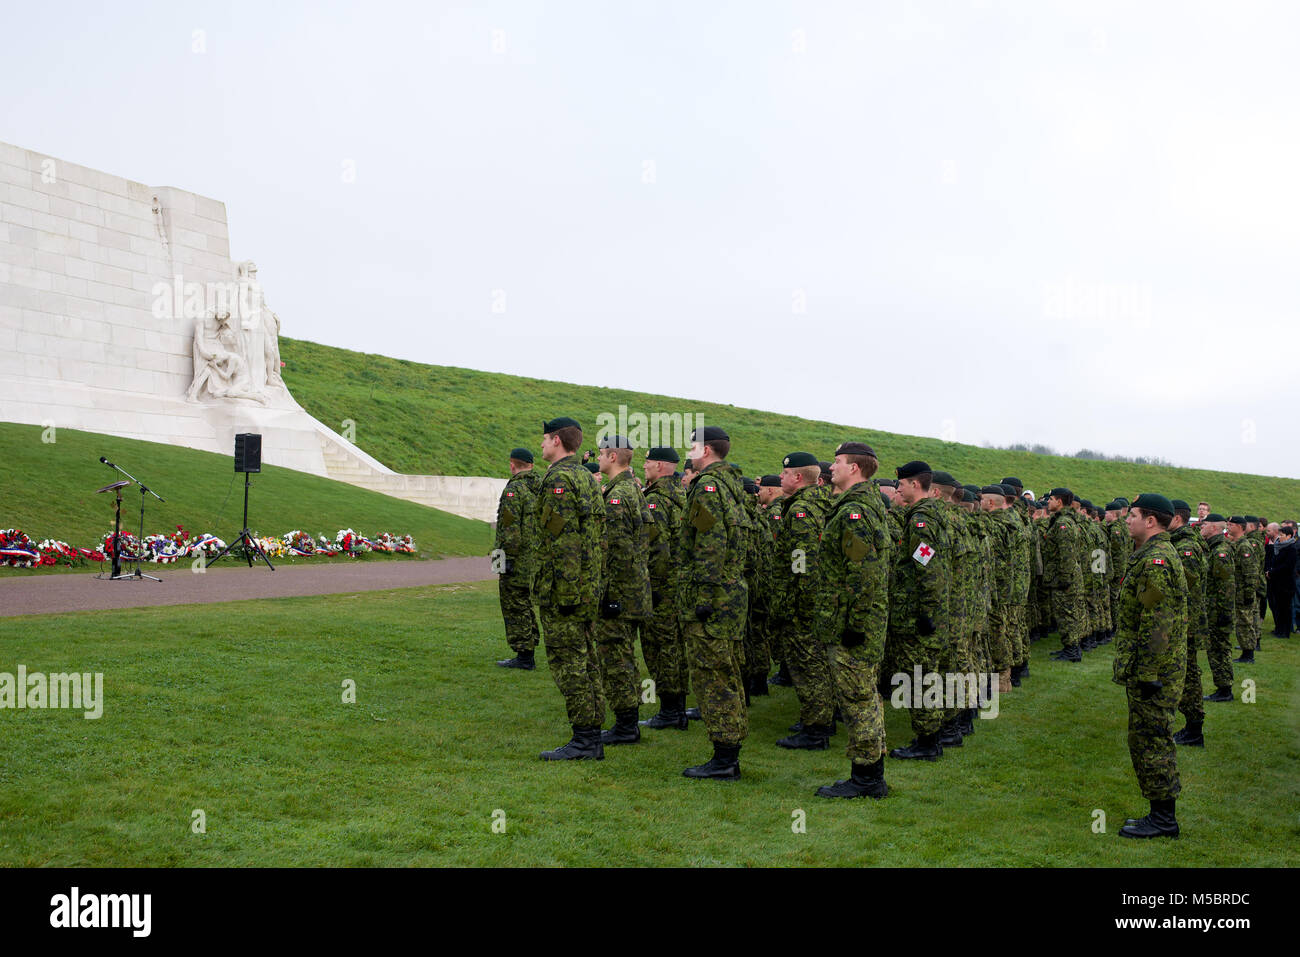 The Remembrance Day Ceremony at The Canadian National Vimy Memorial on November 11, 2014 Stock Photo